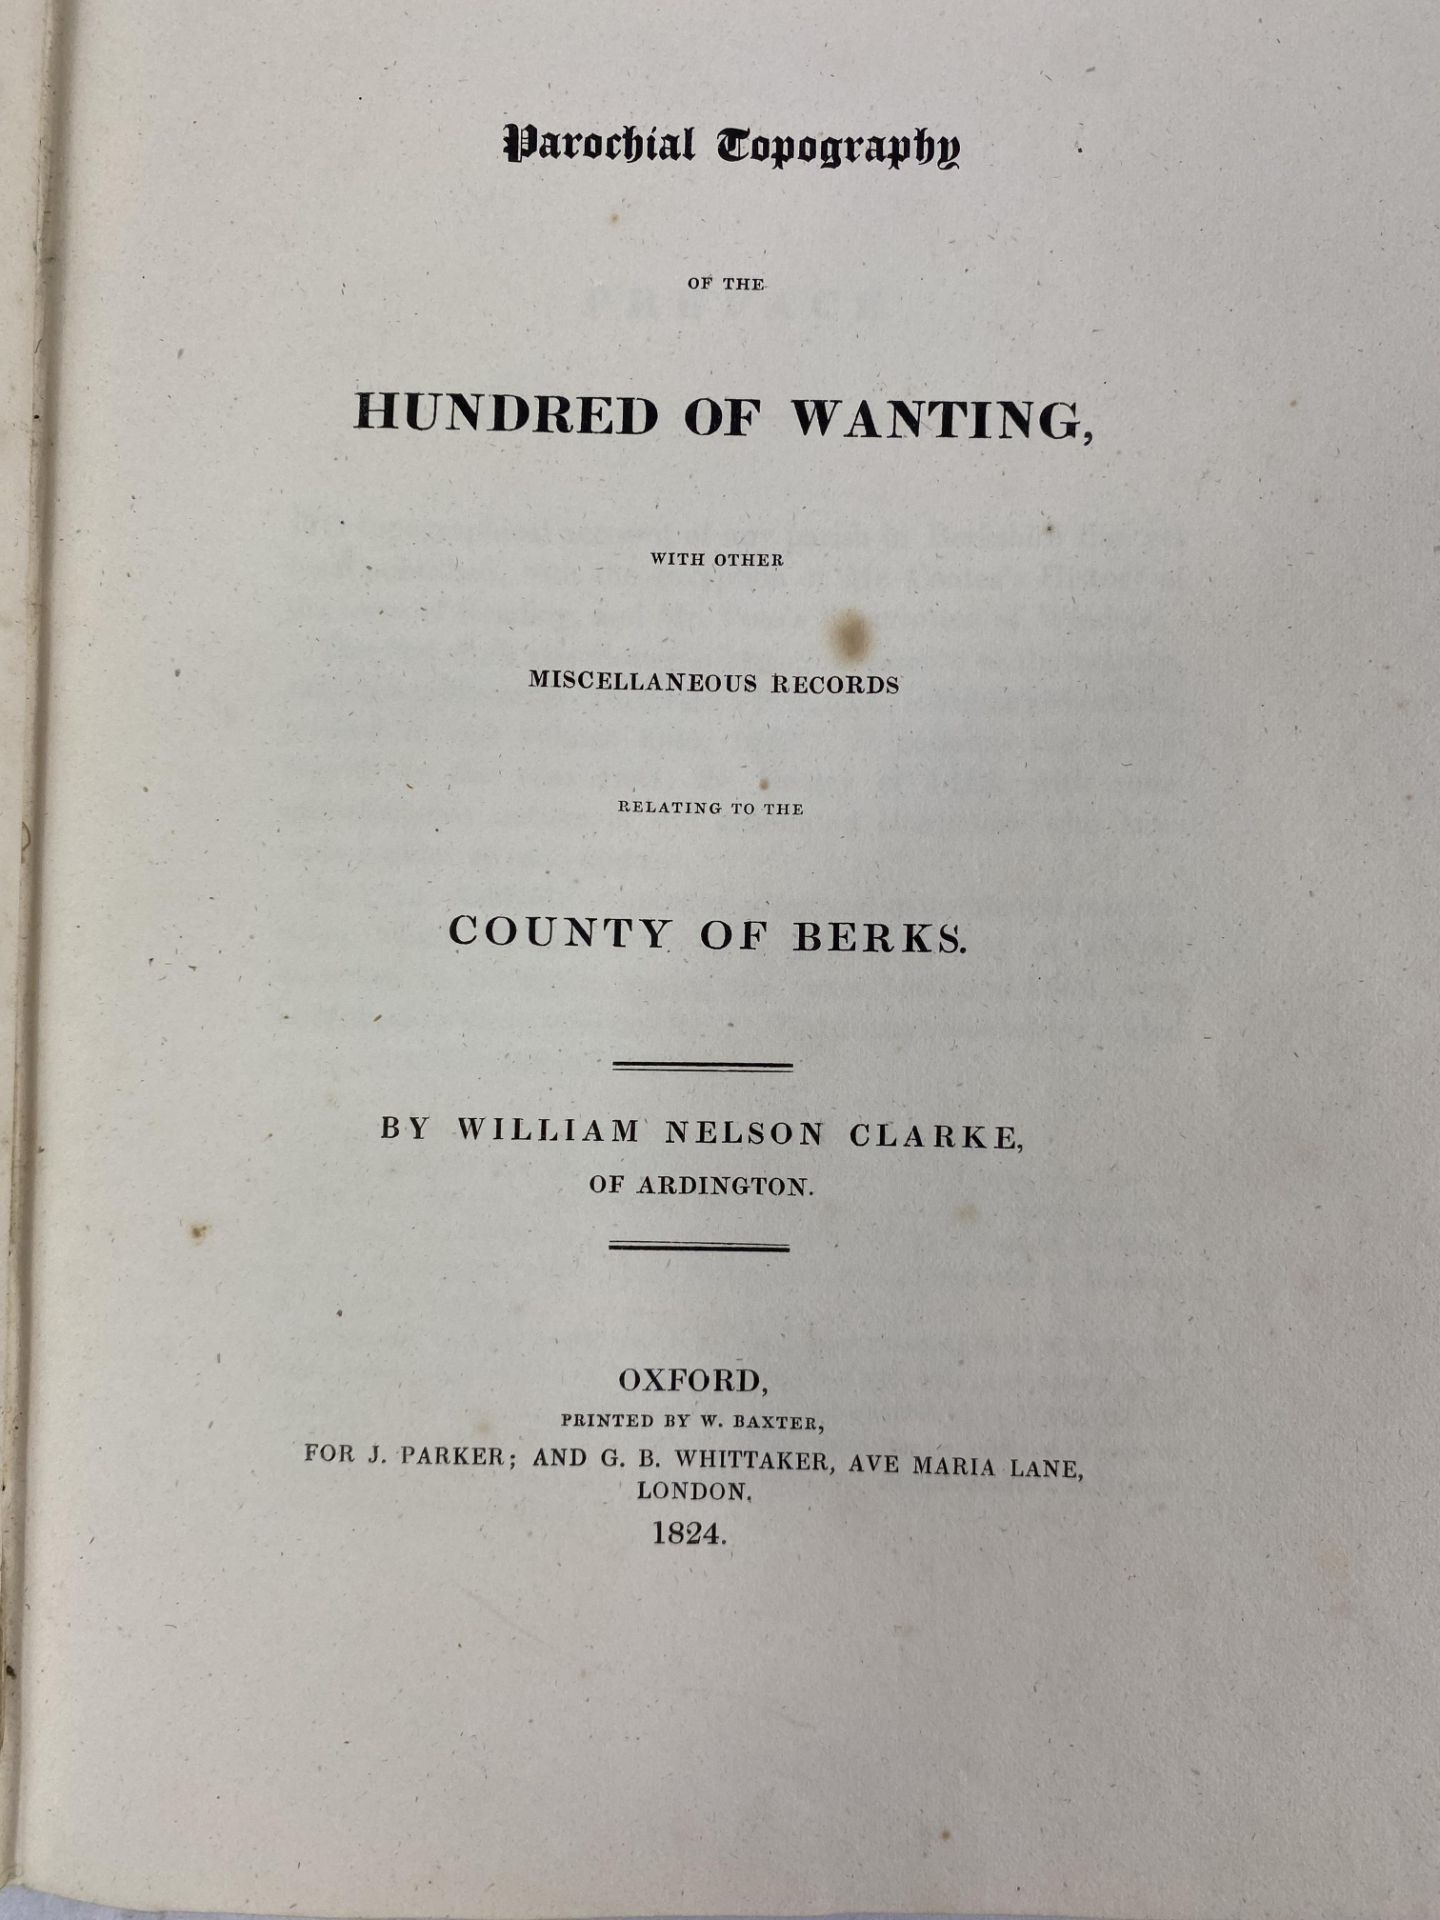 Parochial Topography of the Hundred of Wanting by William Nelson Clarke of Ardington, Oxford 1824 - Image 2 of 4